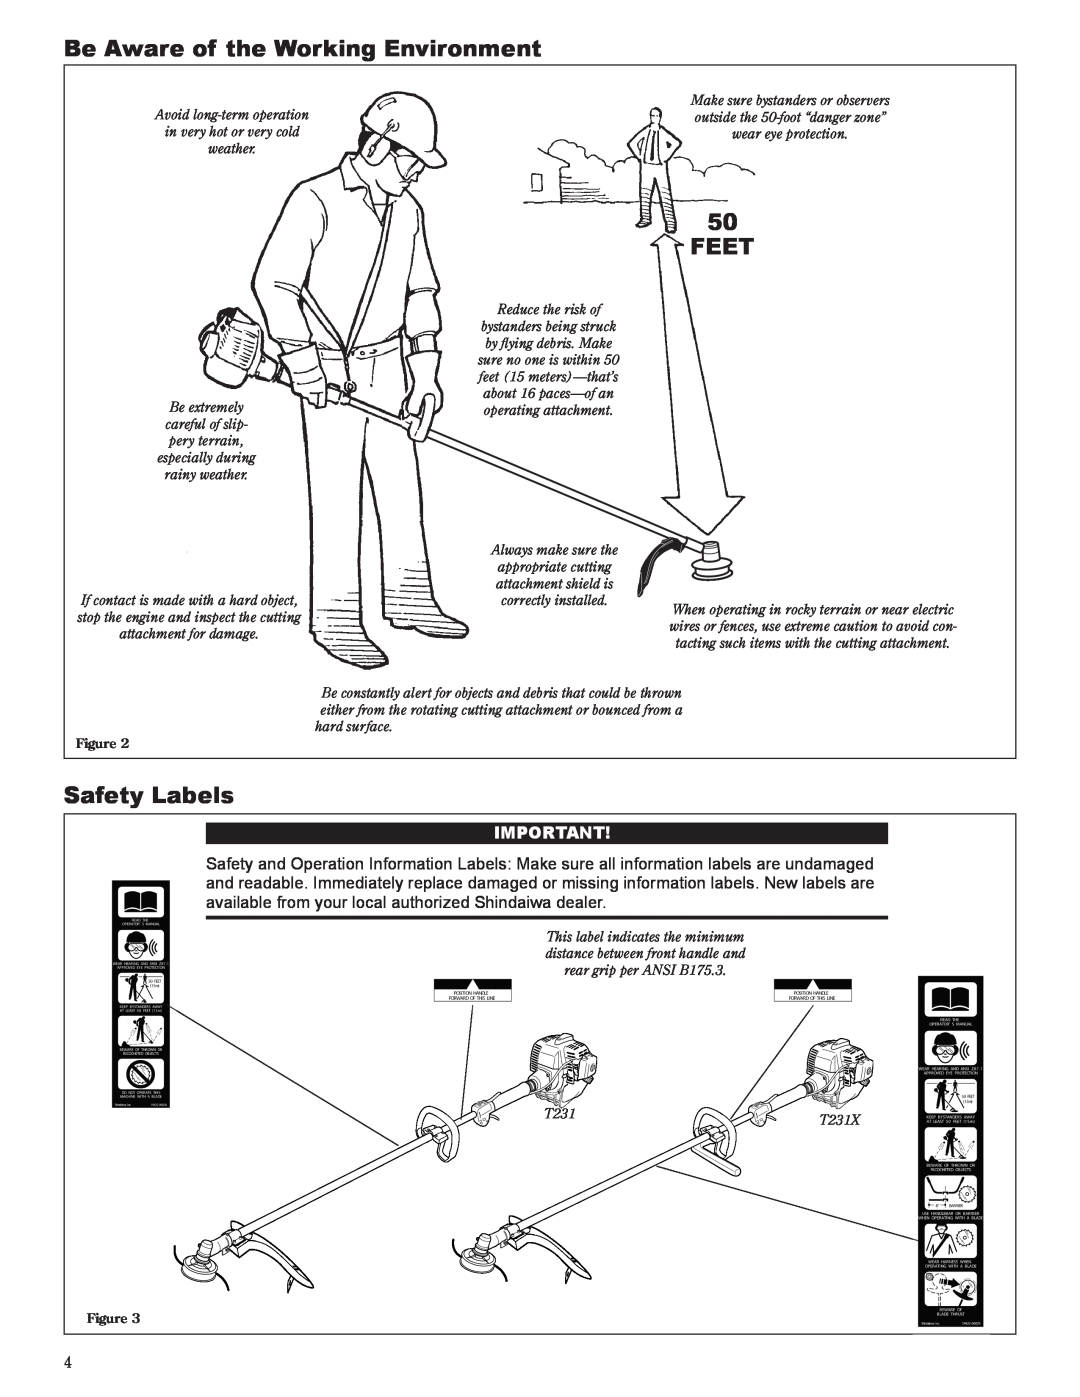 Shindaiwa 81642 manual Be Aware of the Working Environment, Safety Labels, Feet 